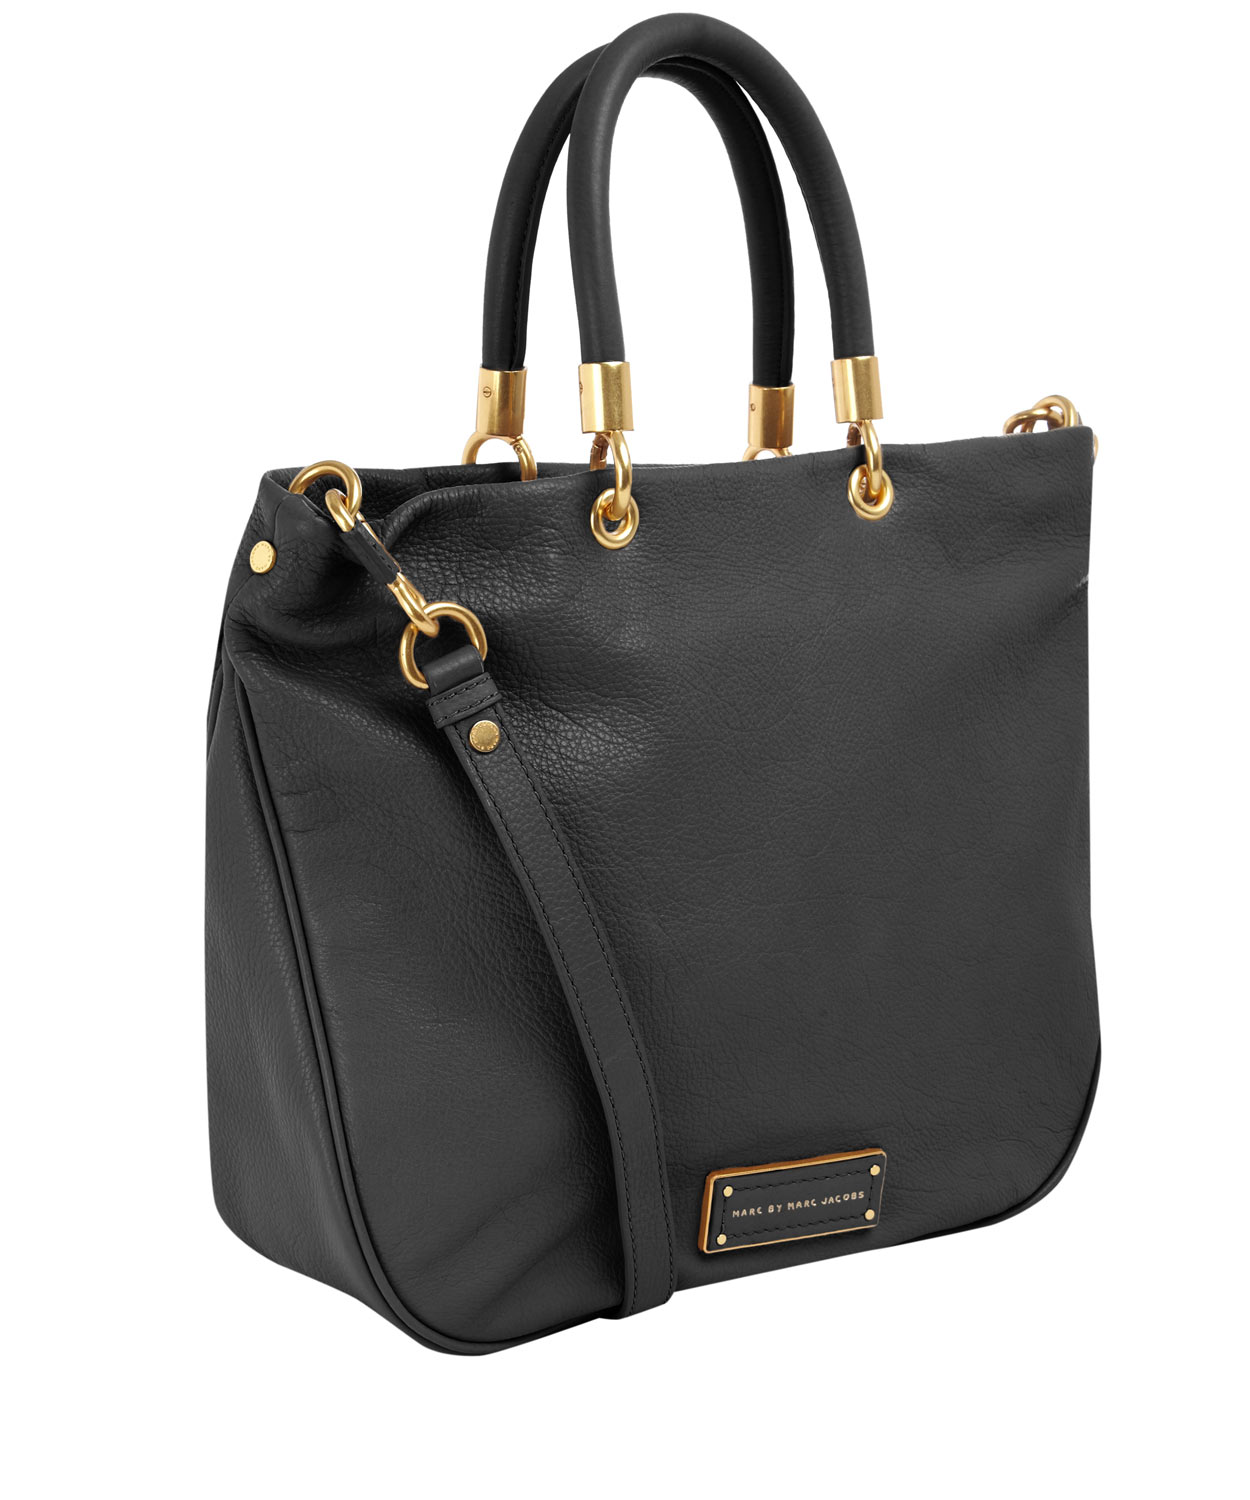 Marc By Marc Jacobs Black Too Hot To Handle Mini Shopper Tote Bag in Black - Lyst